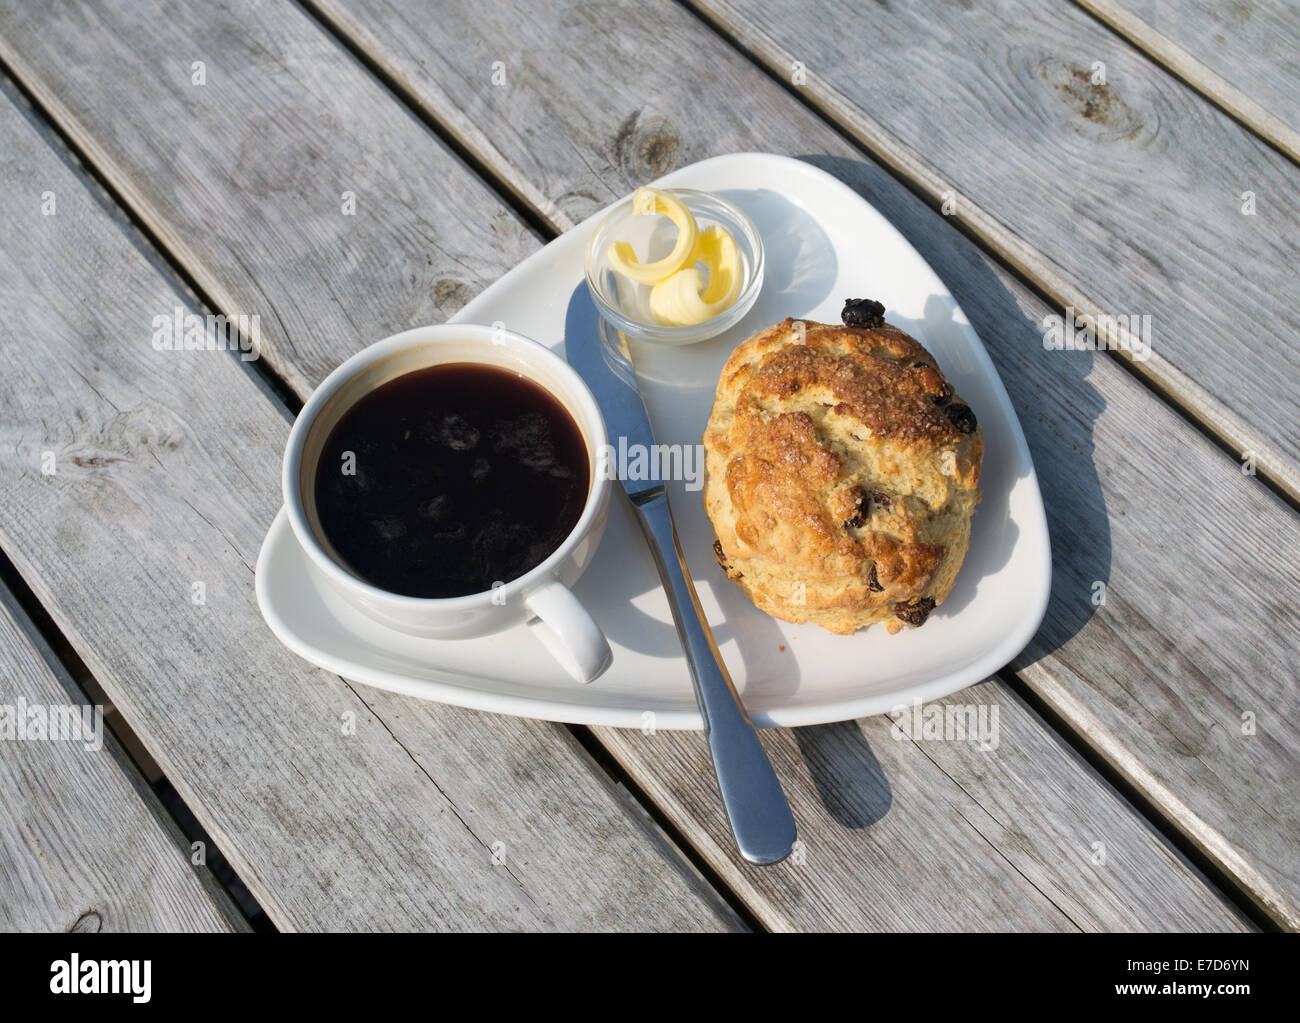 Black coffee, fruit scone scone and butter,  Rydal, Cumbria, England, UK Stock Photo